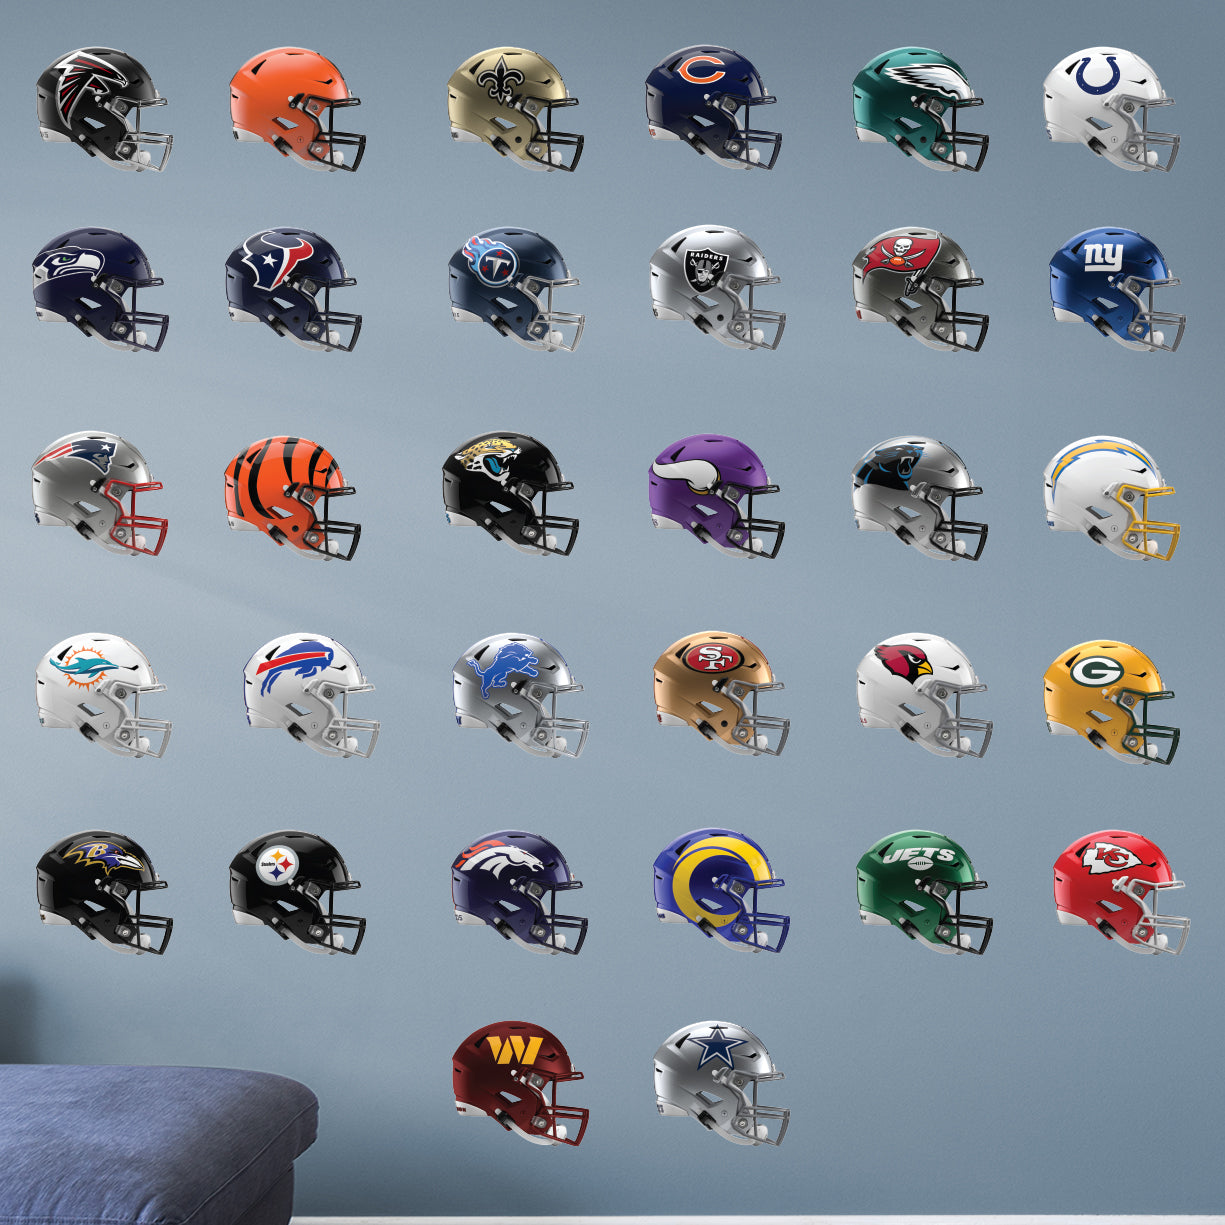 2022 Helmet Collection - Officially Licensed NFL Removable